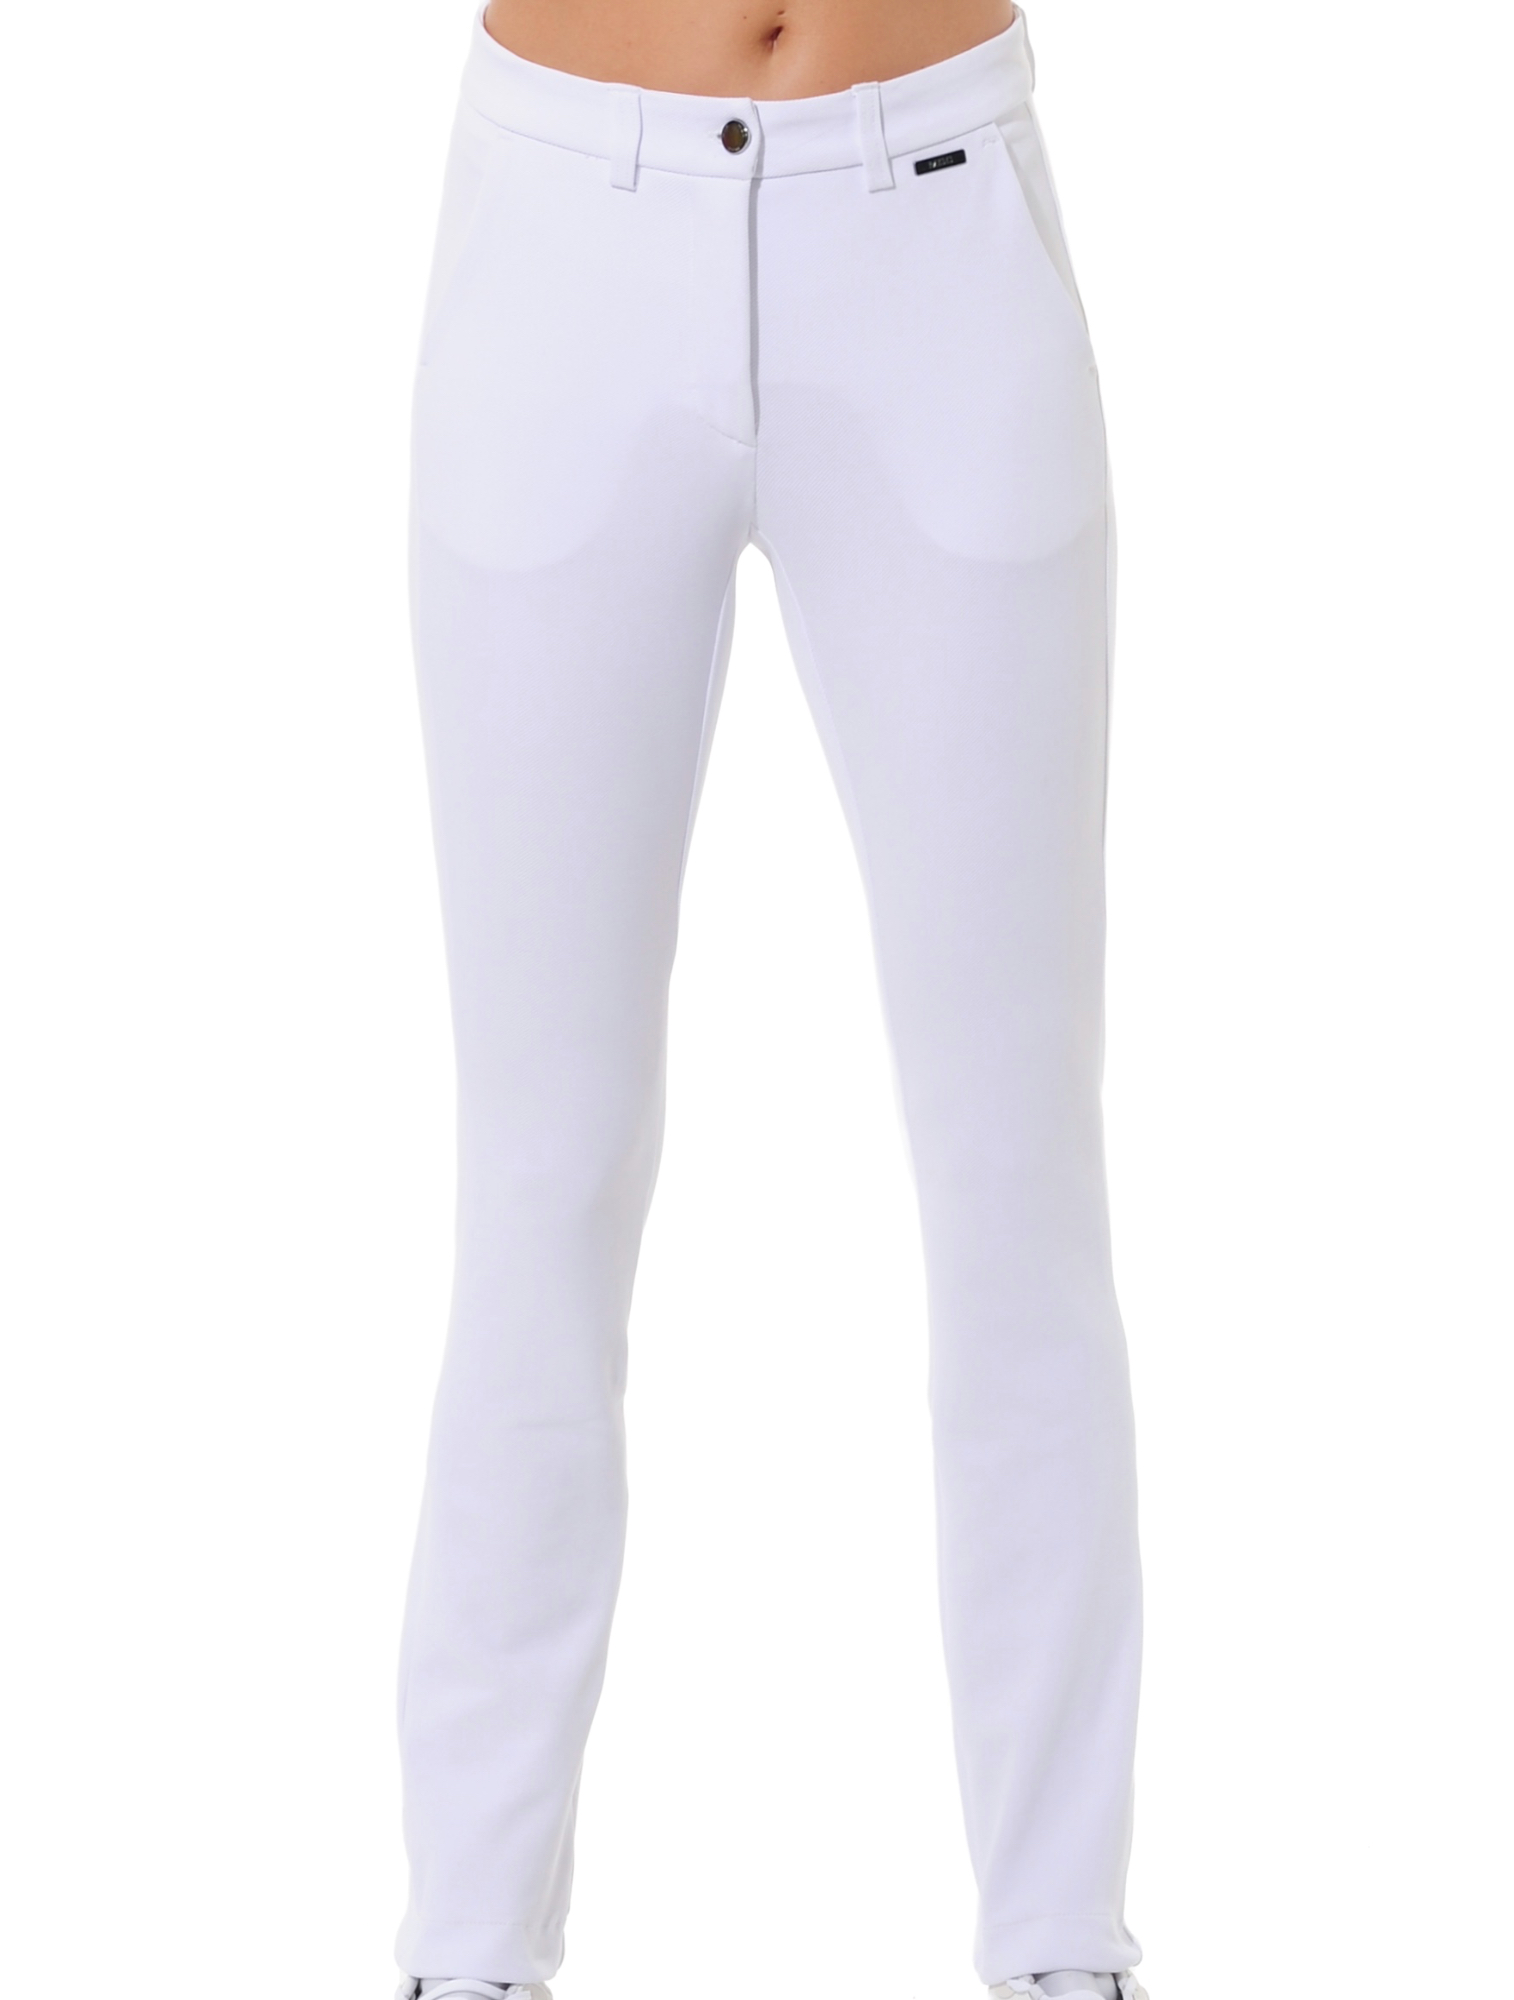 Cord stretch long chinos white